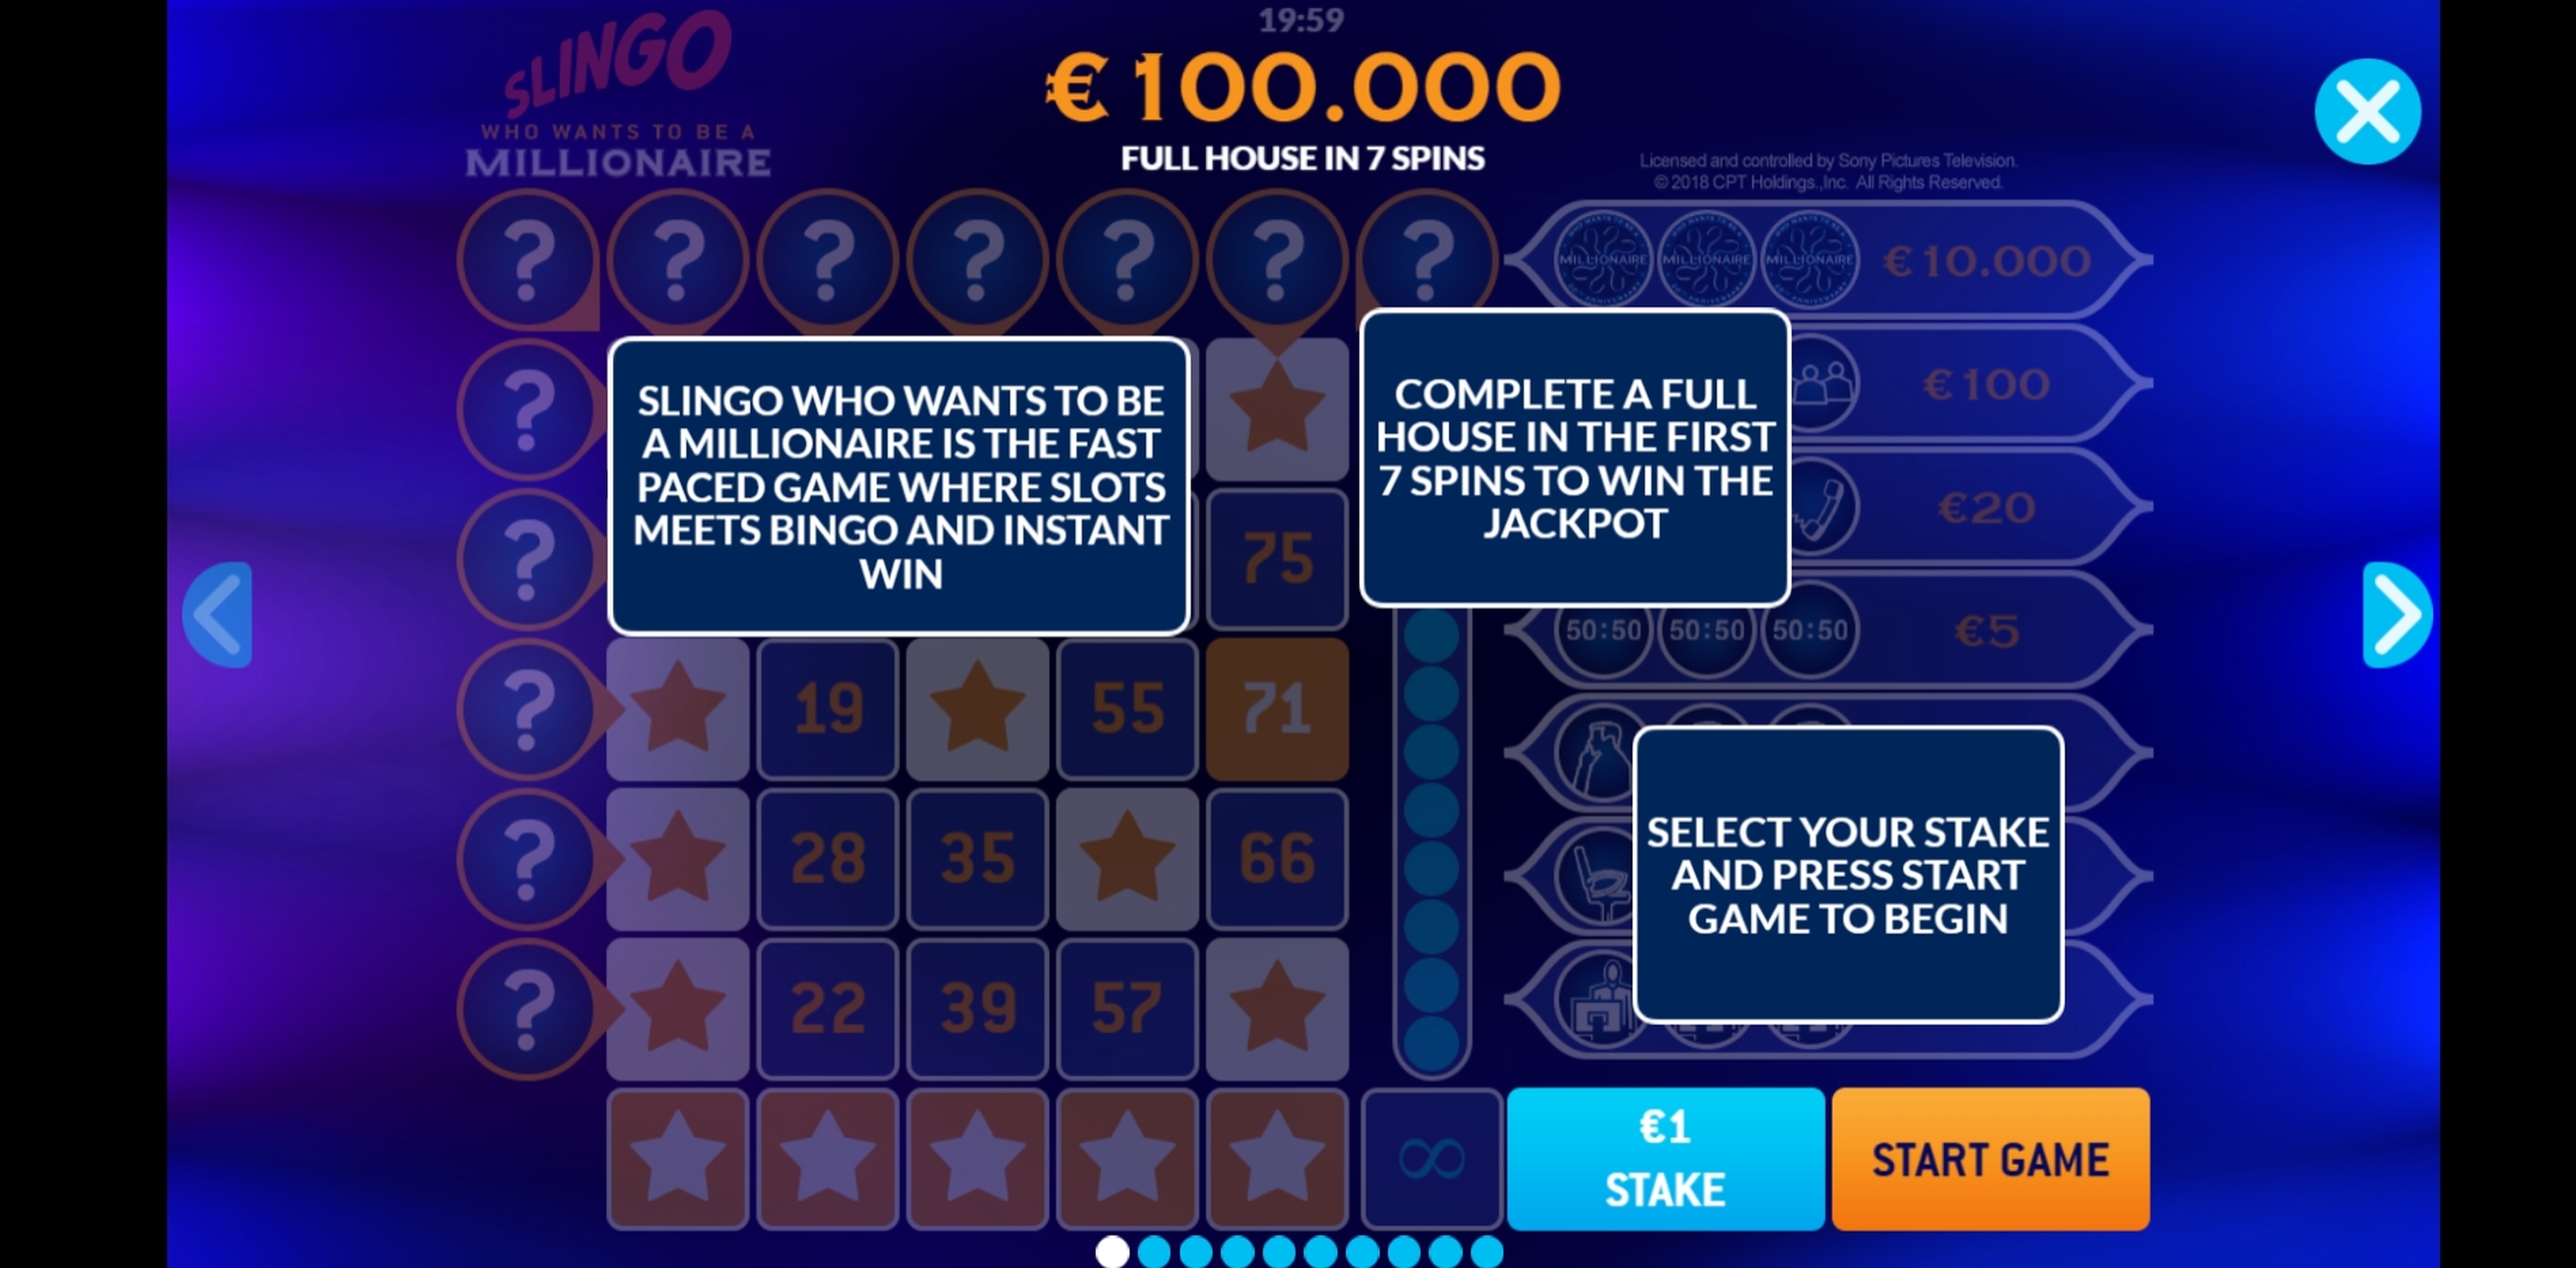 Info of Slingo Who Wants to be a Millionaire Slot Game by Slingo